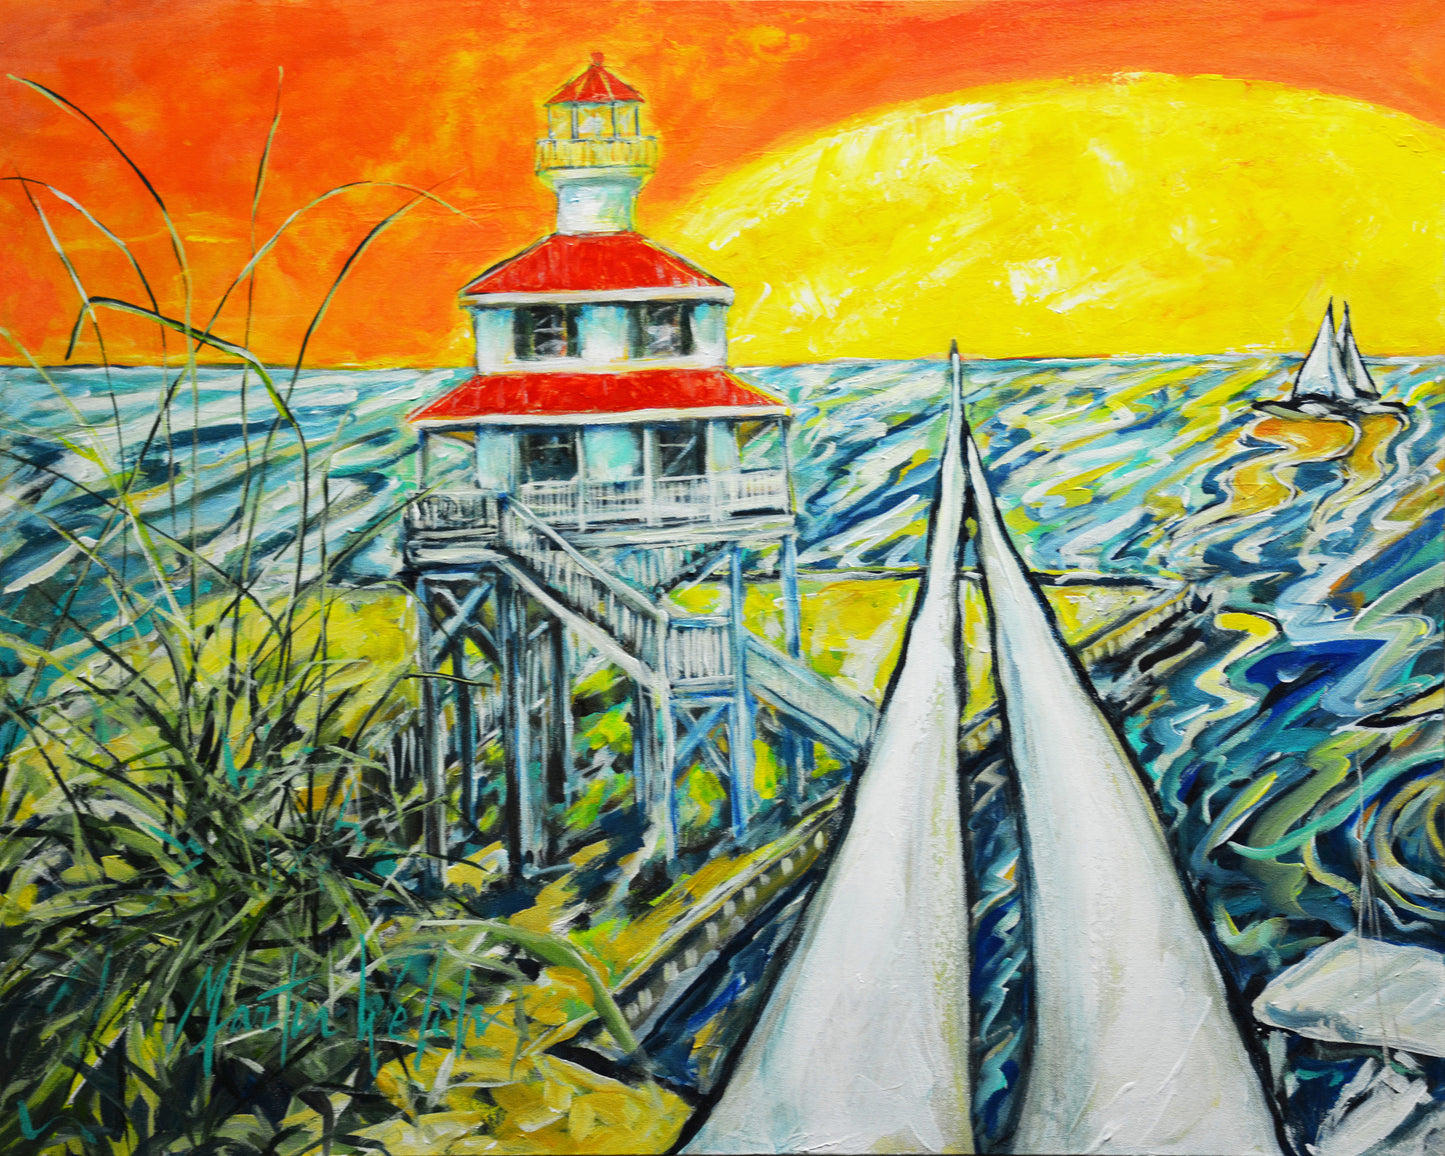 Sunset on West End - New Orleans Lighthouse - 11"x14" Print